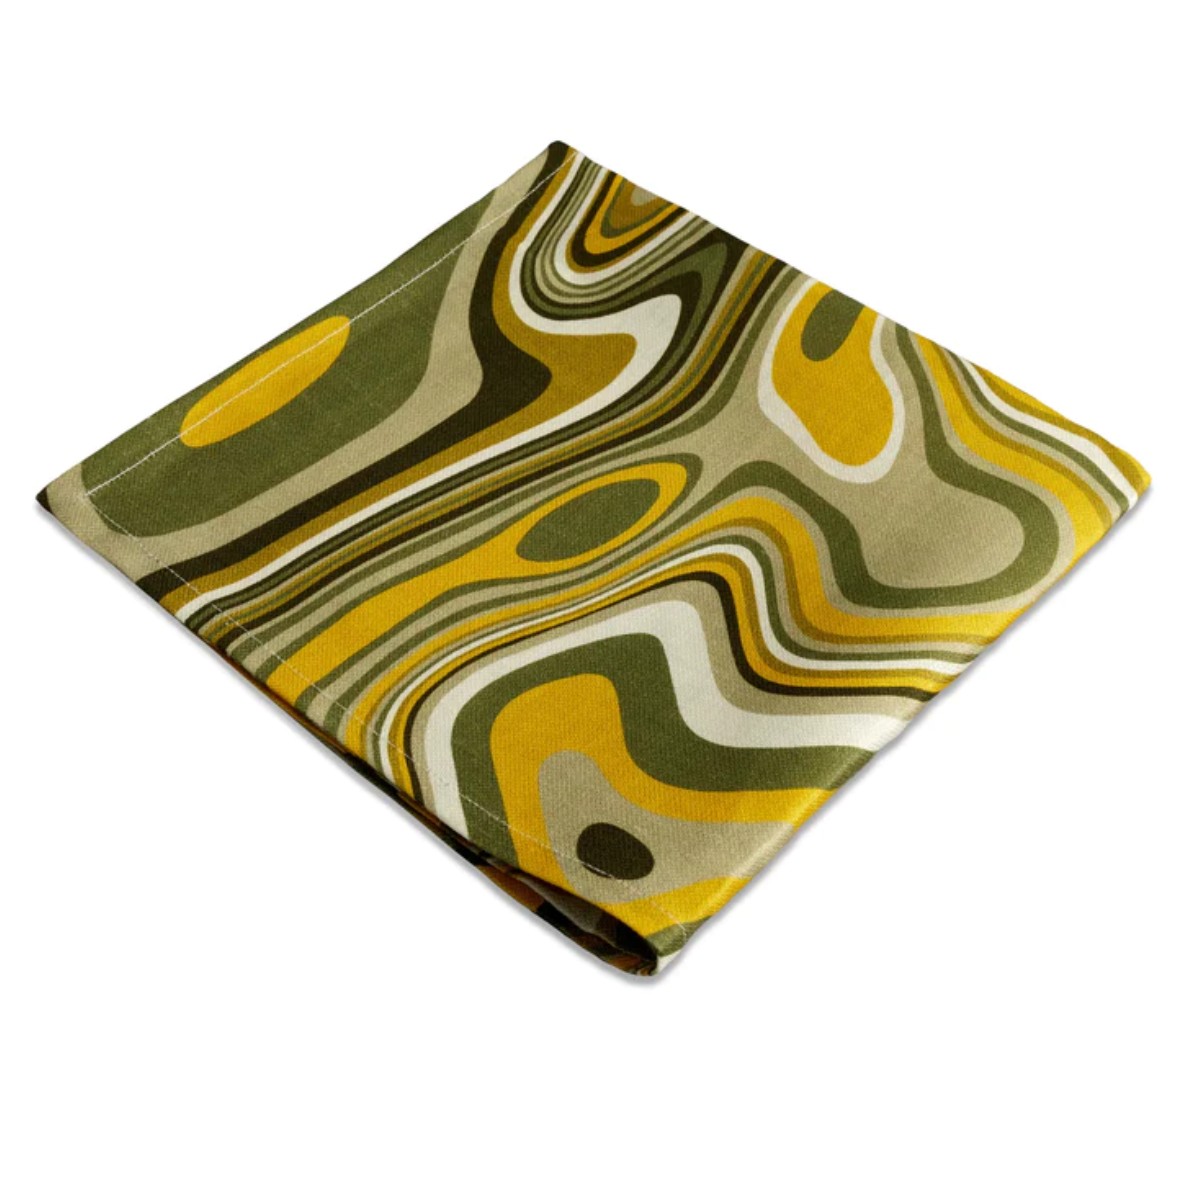 L’Objet | Waves Napkins (Set of 4) | Green and Yellow